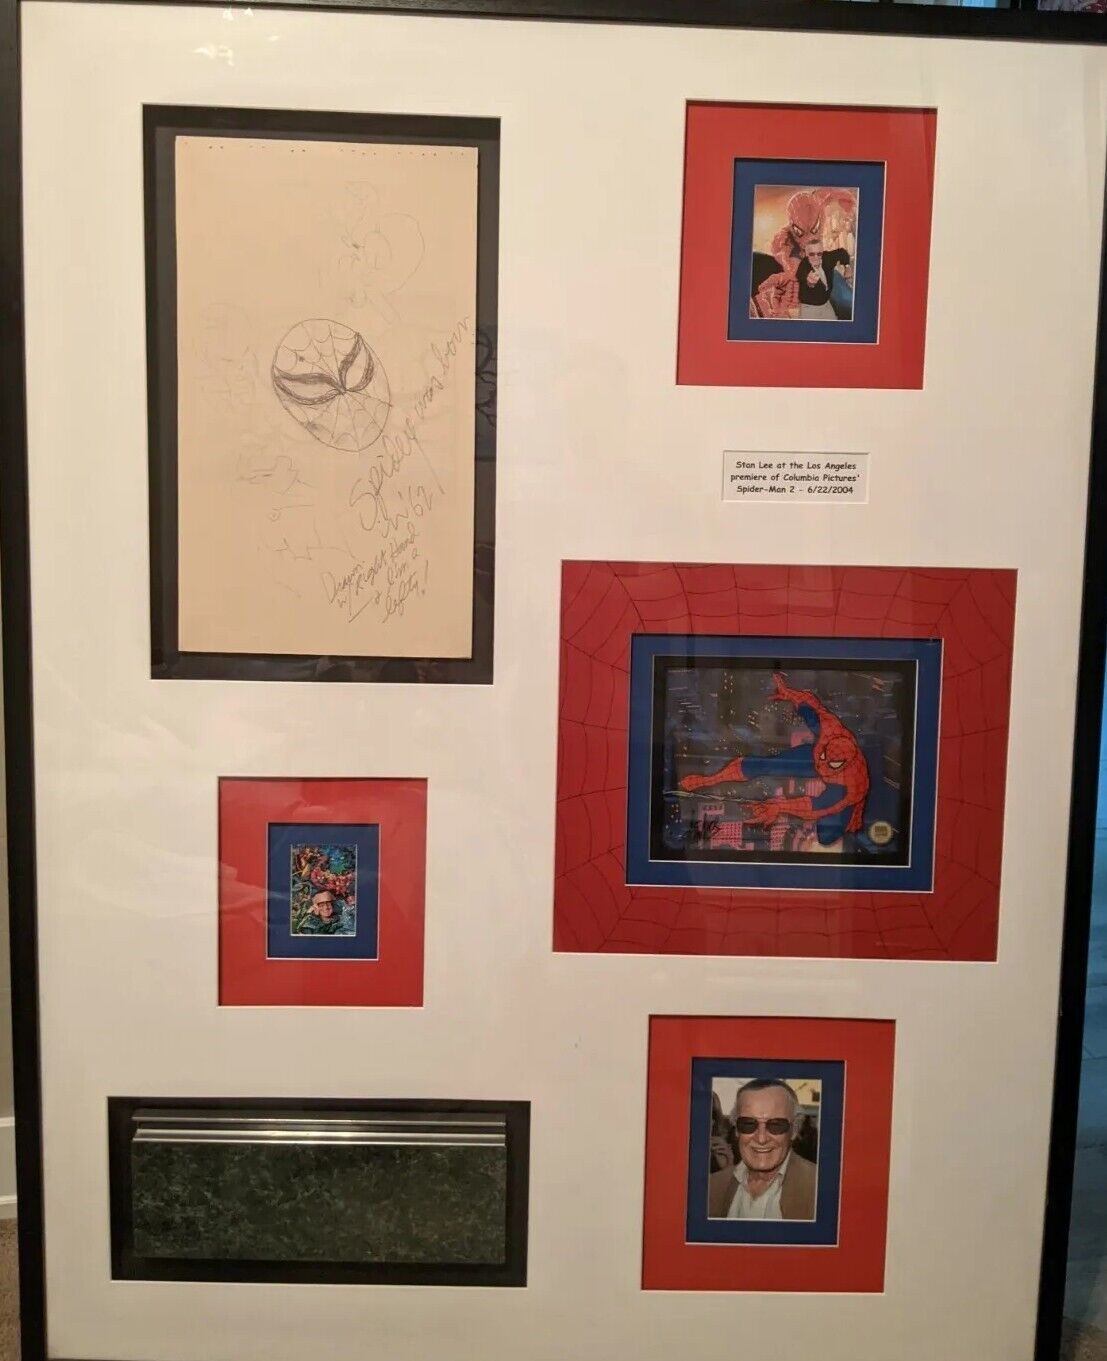 Stan Lee Owned Work Desk Drawers with hand drawings Spider-Man/rare autographs